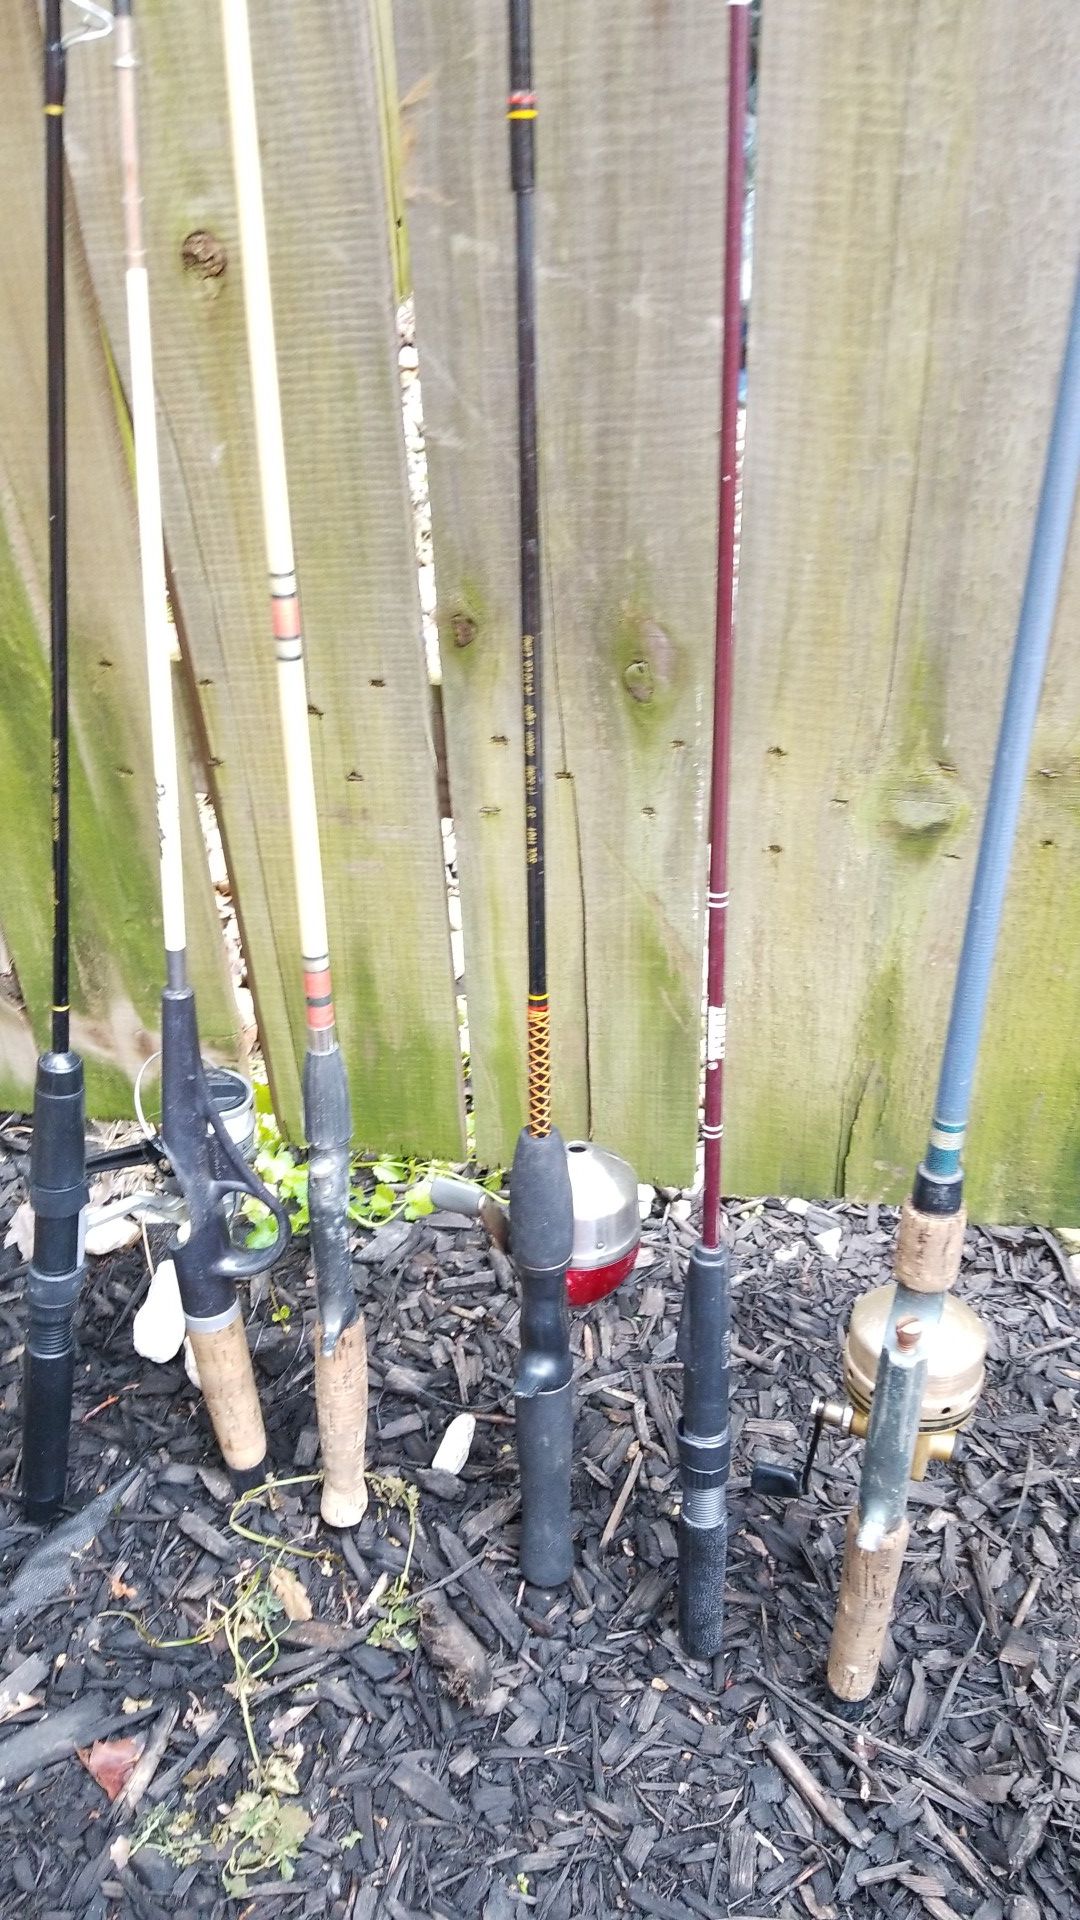 Very nice assorted 6 fishing poles some old some newer